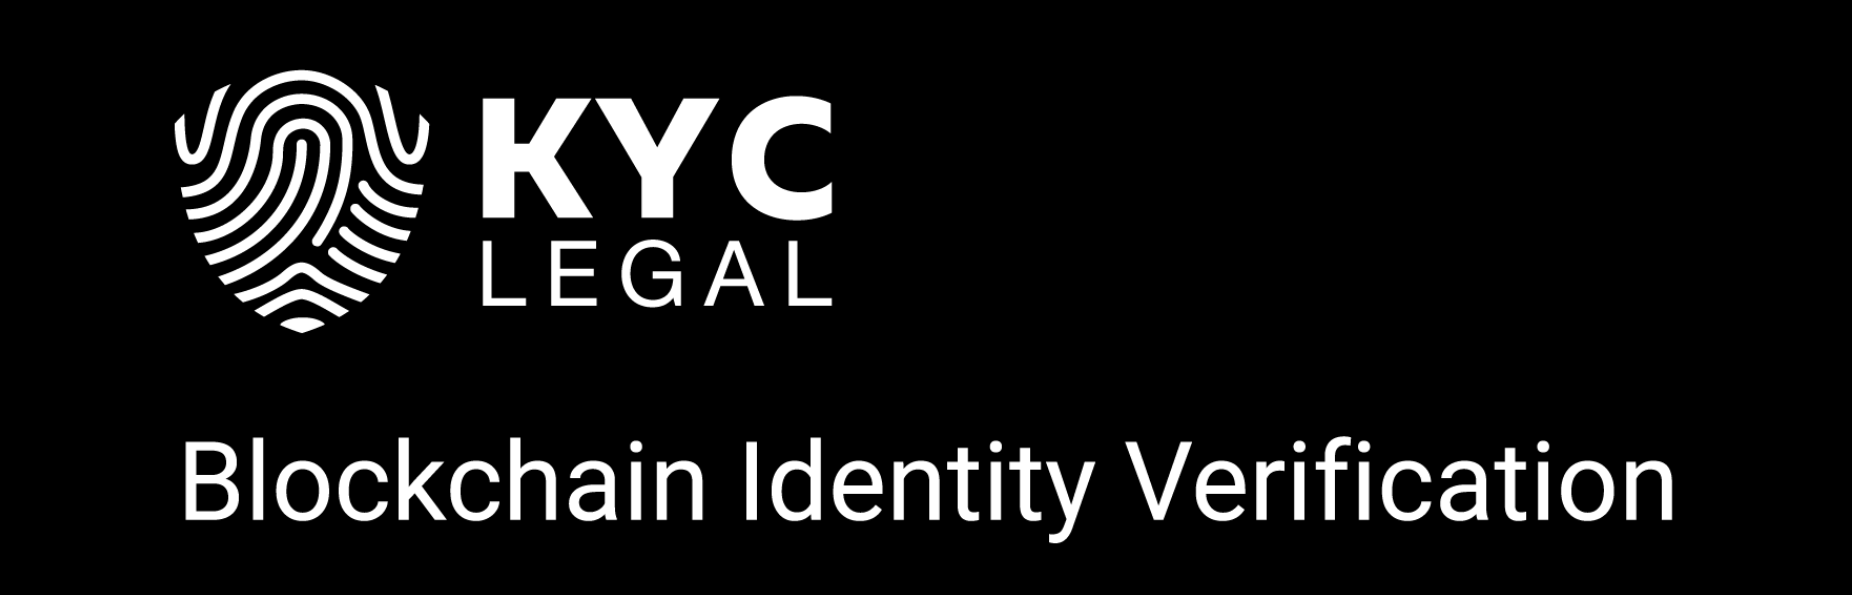 KYC4.png